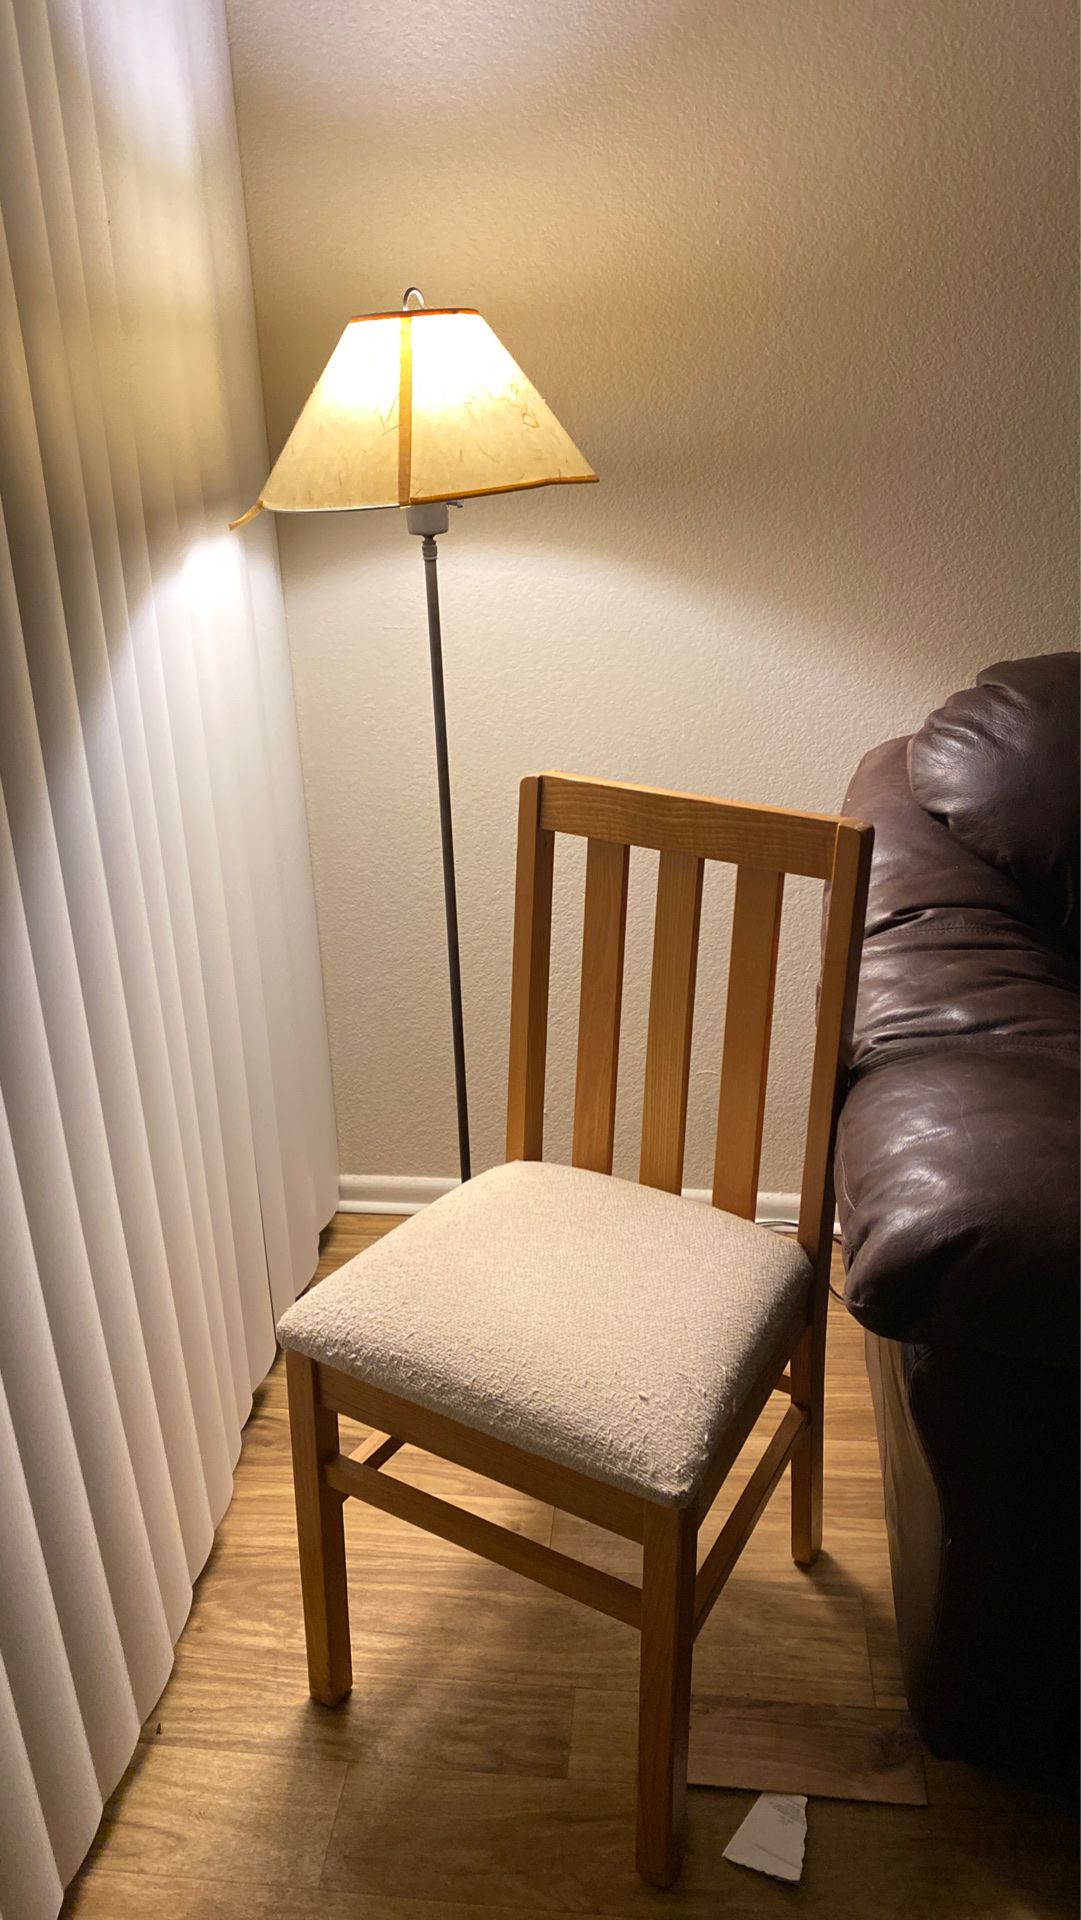 Chair and lamp